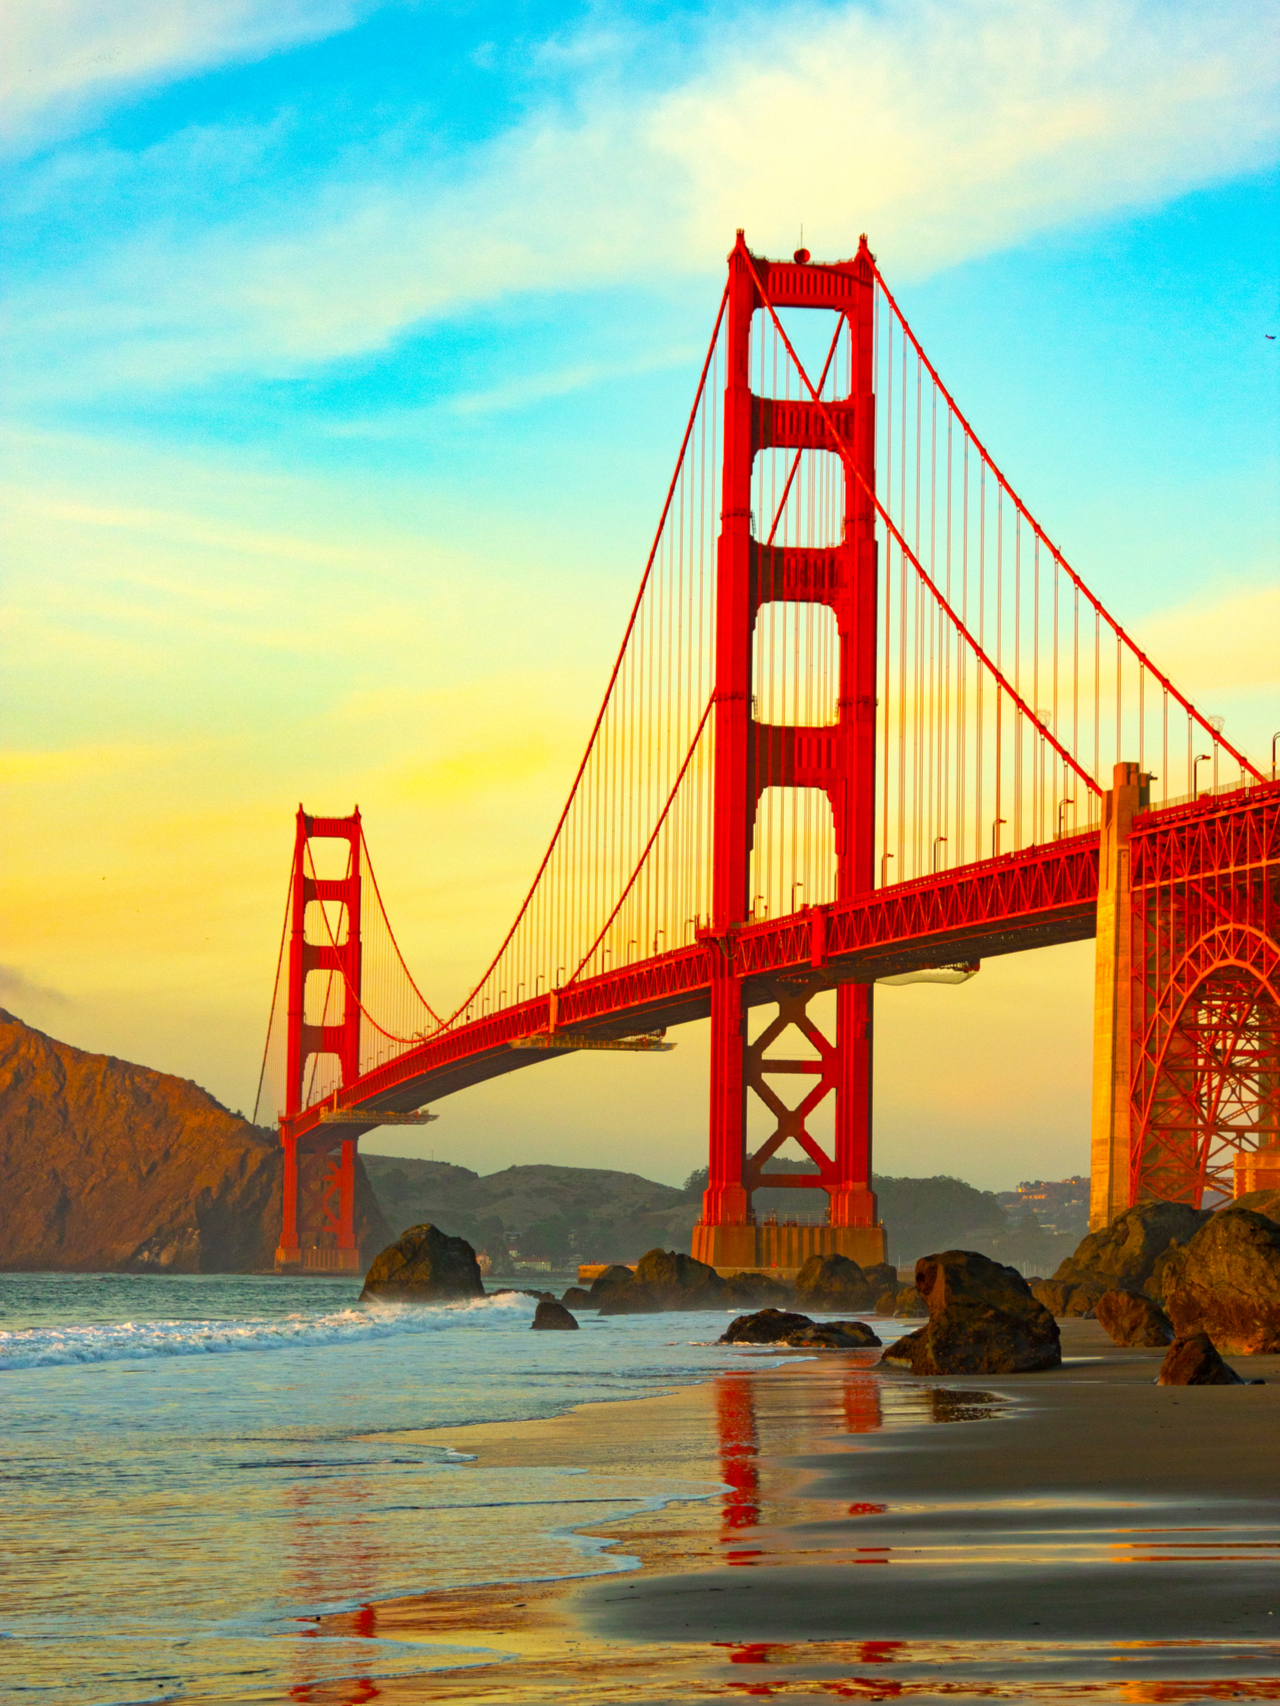 Golden gate bridge, one of the best things to do in San Francisco